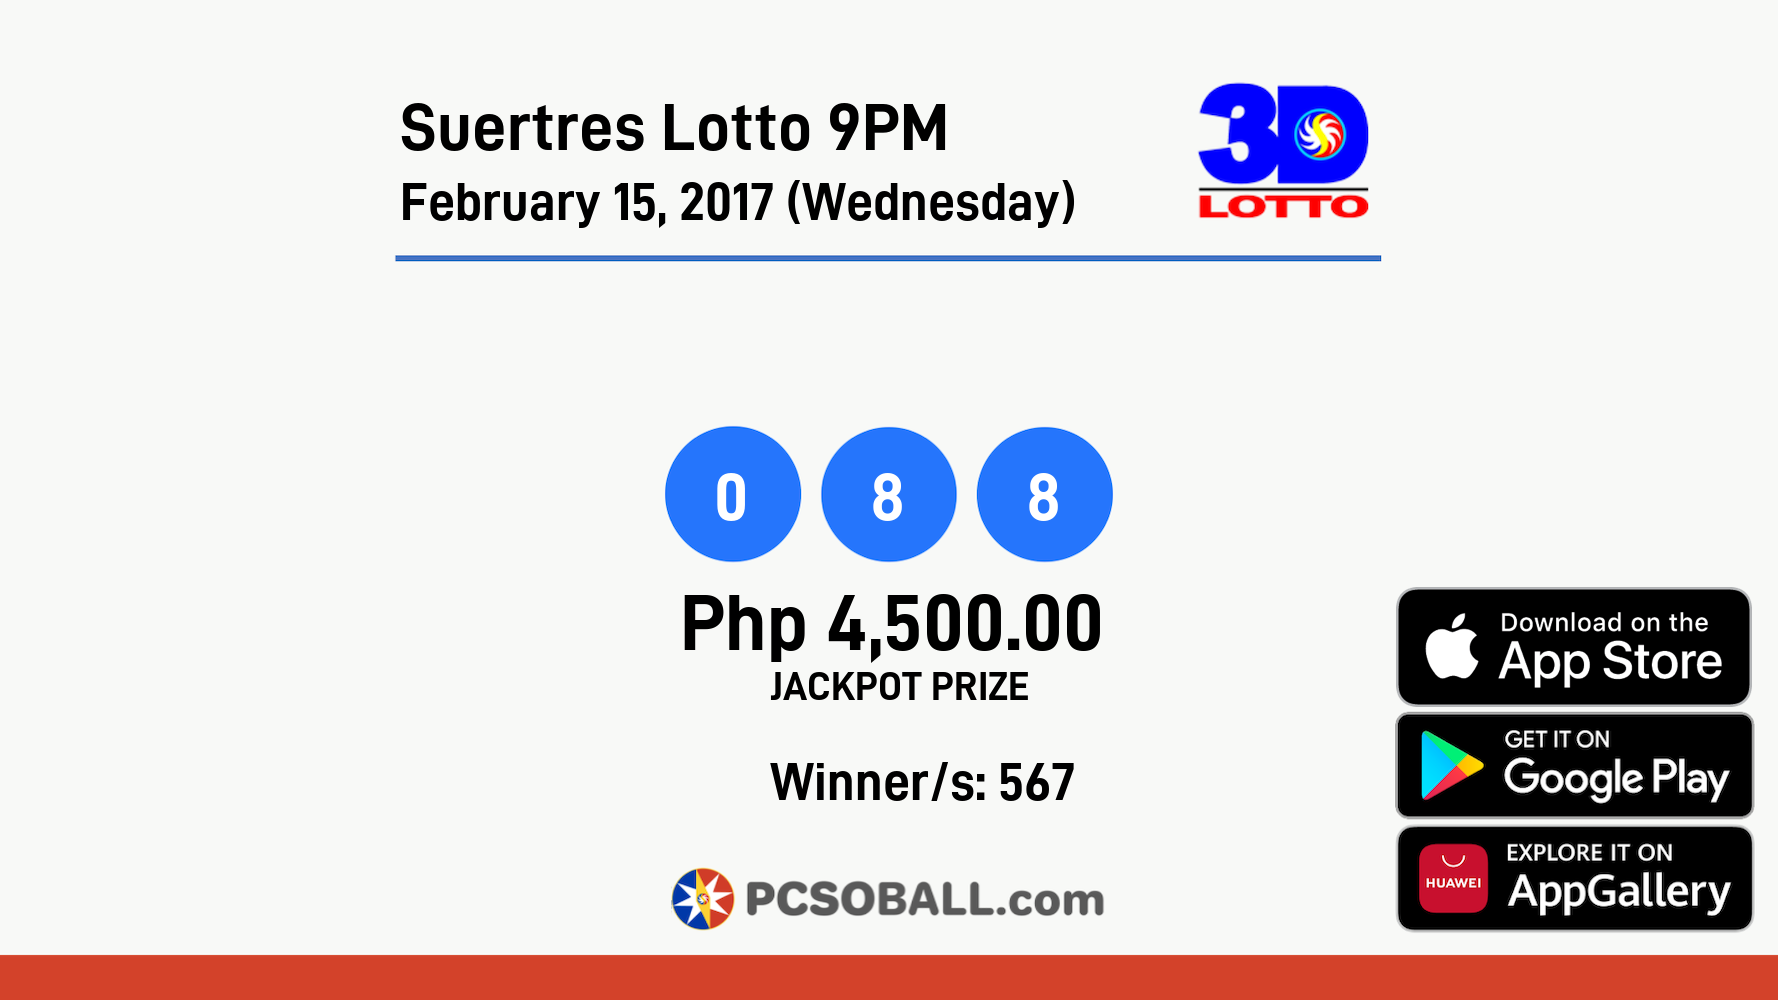 Suertres Lotto 9PM February 15, 2017 (Wednesday) Result